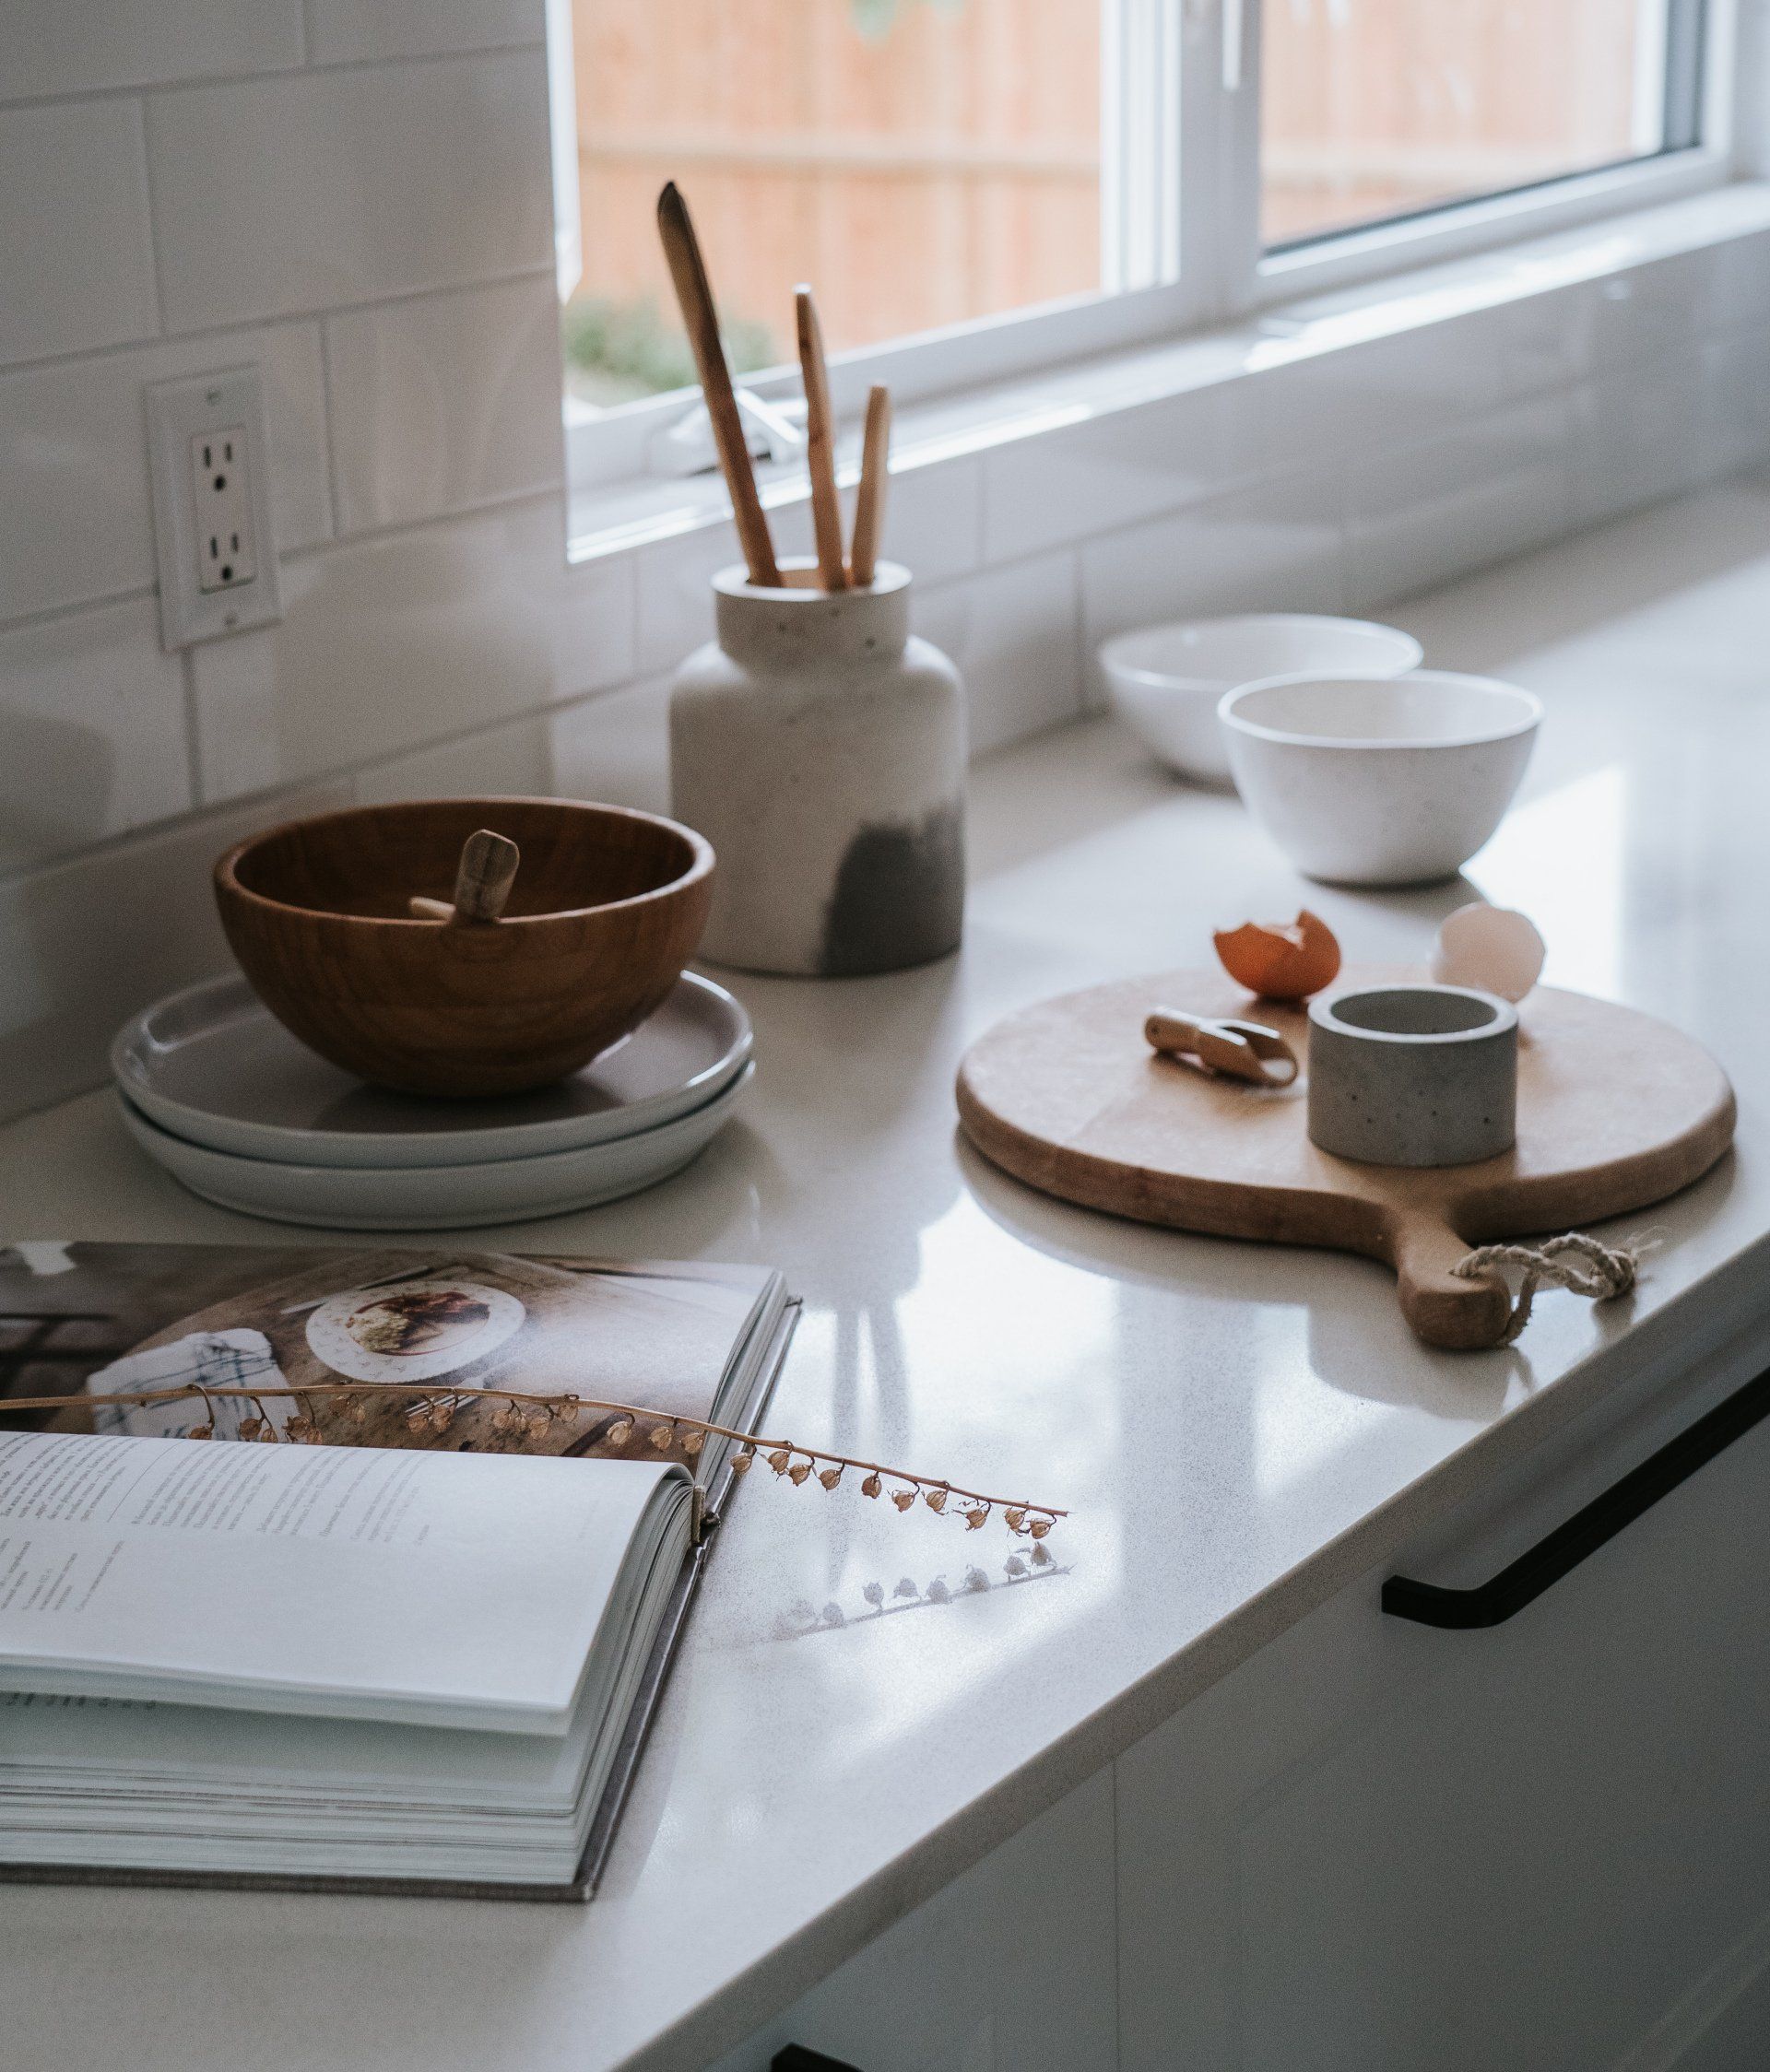 A quartz-look countertop with a recipe book and bowls atop it in front of a subway tile backsplash